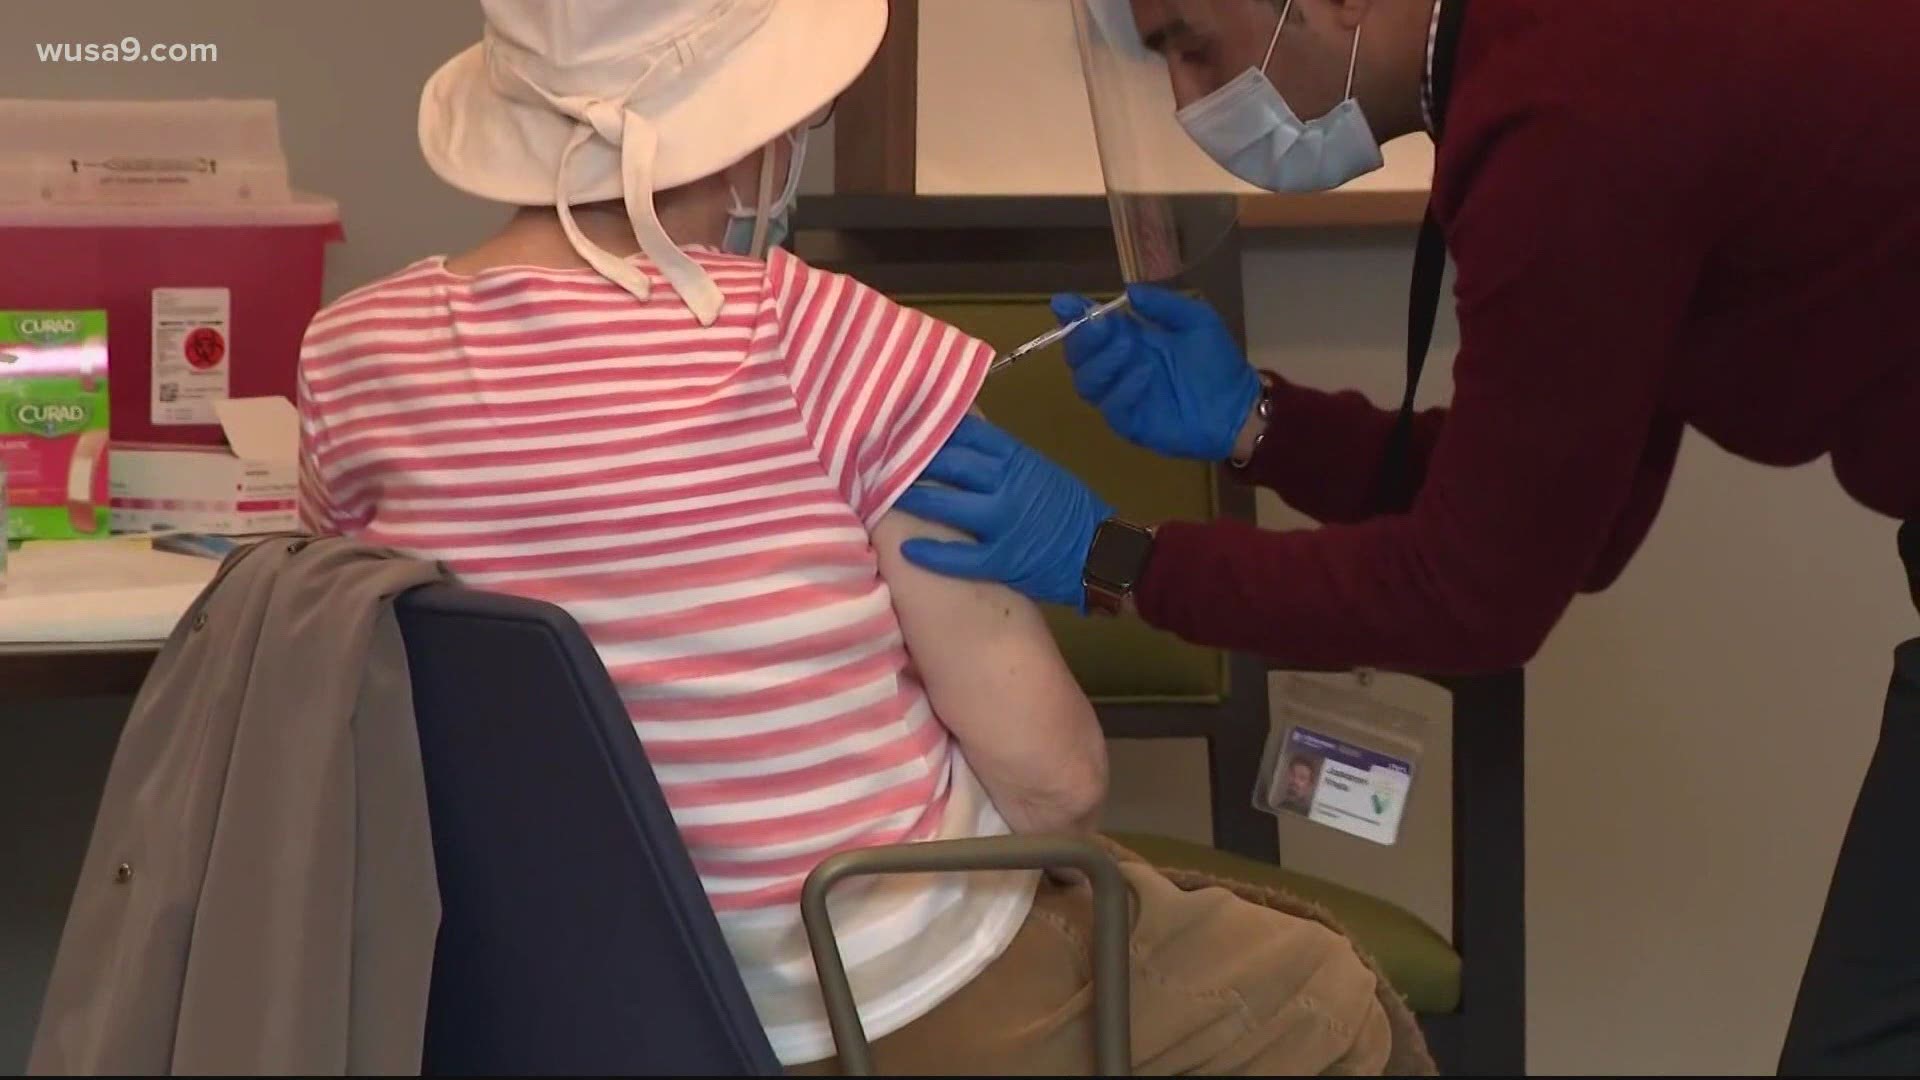 Authorities say 30% to 50% of those who have been vaccinated in Prince George's do not live in the county.